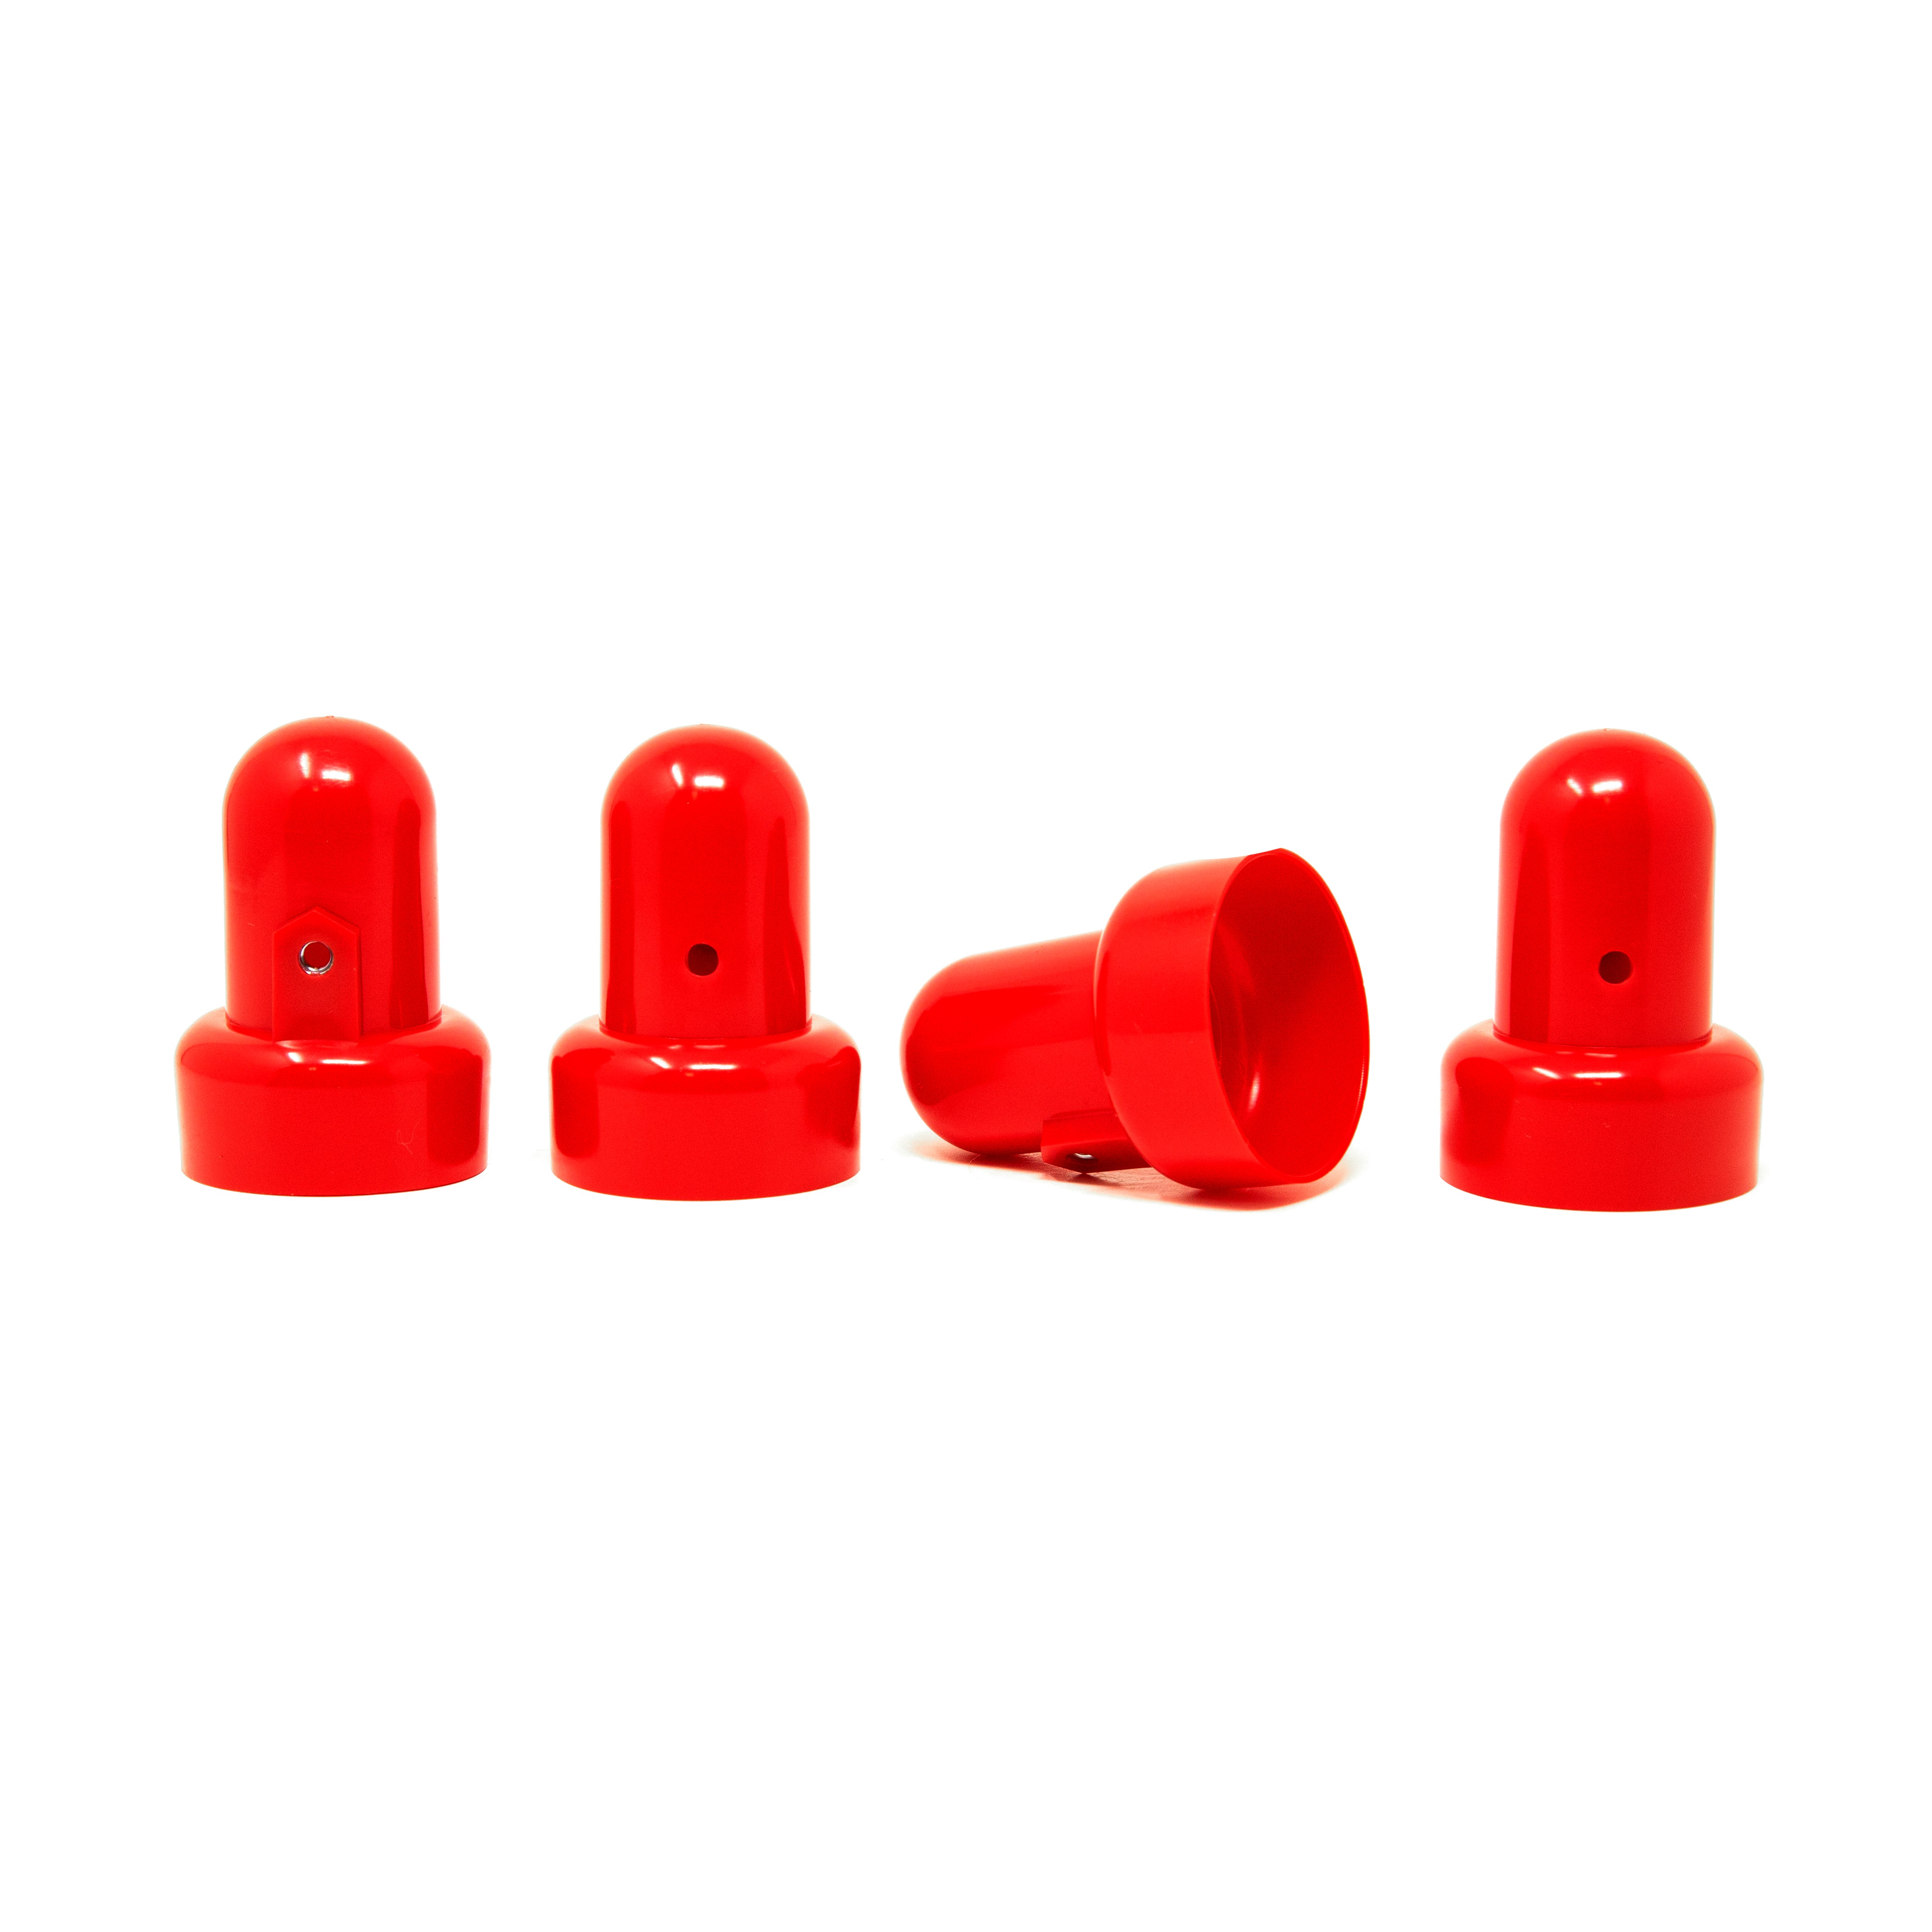 Four red pole caps with one pole cap lying on its side. 